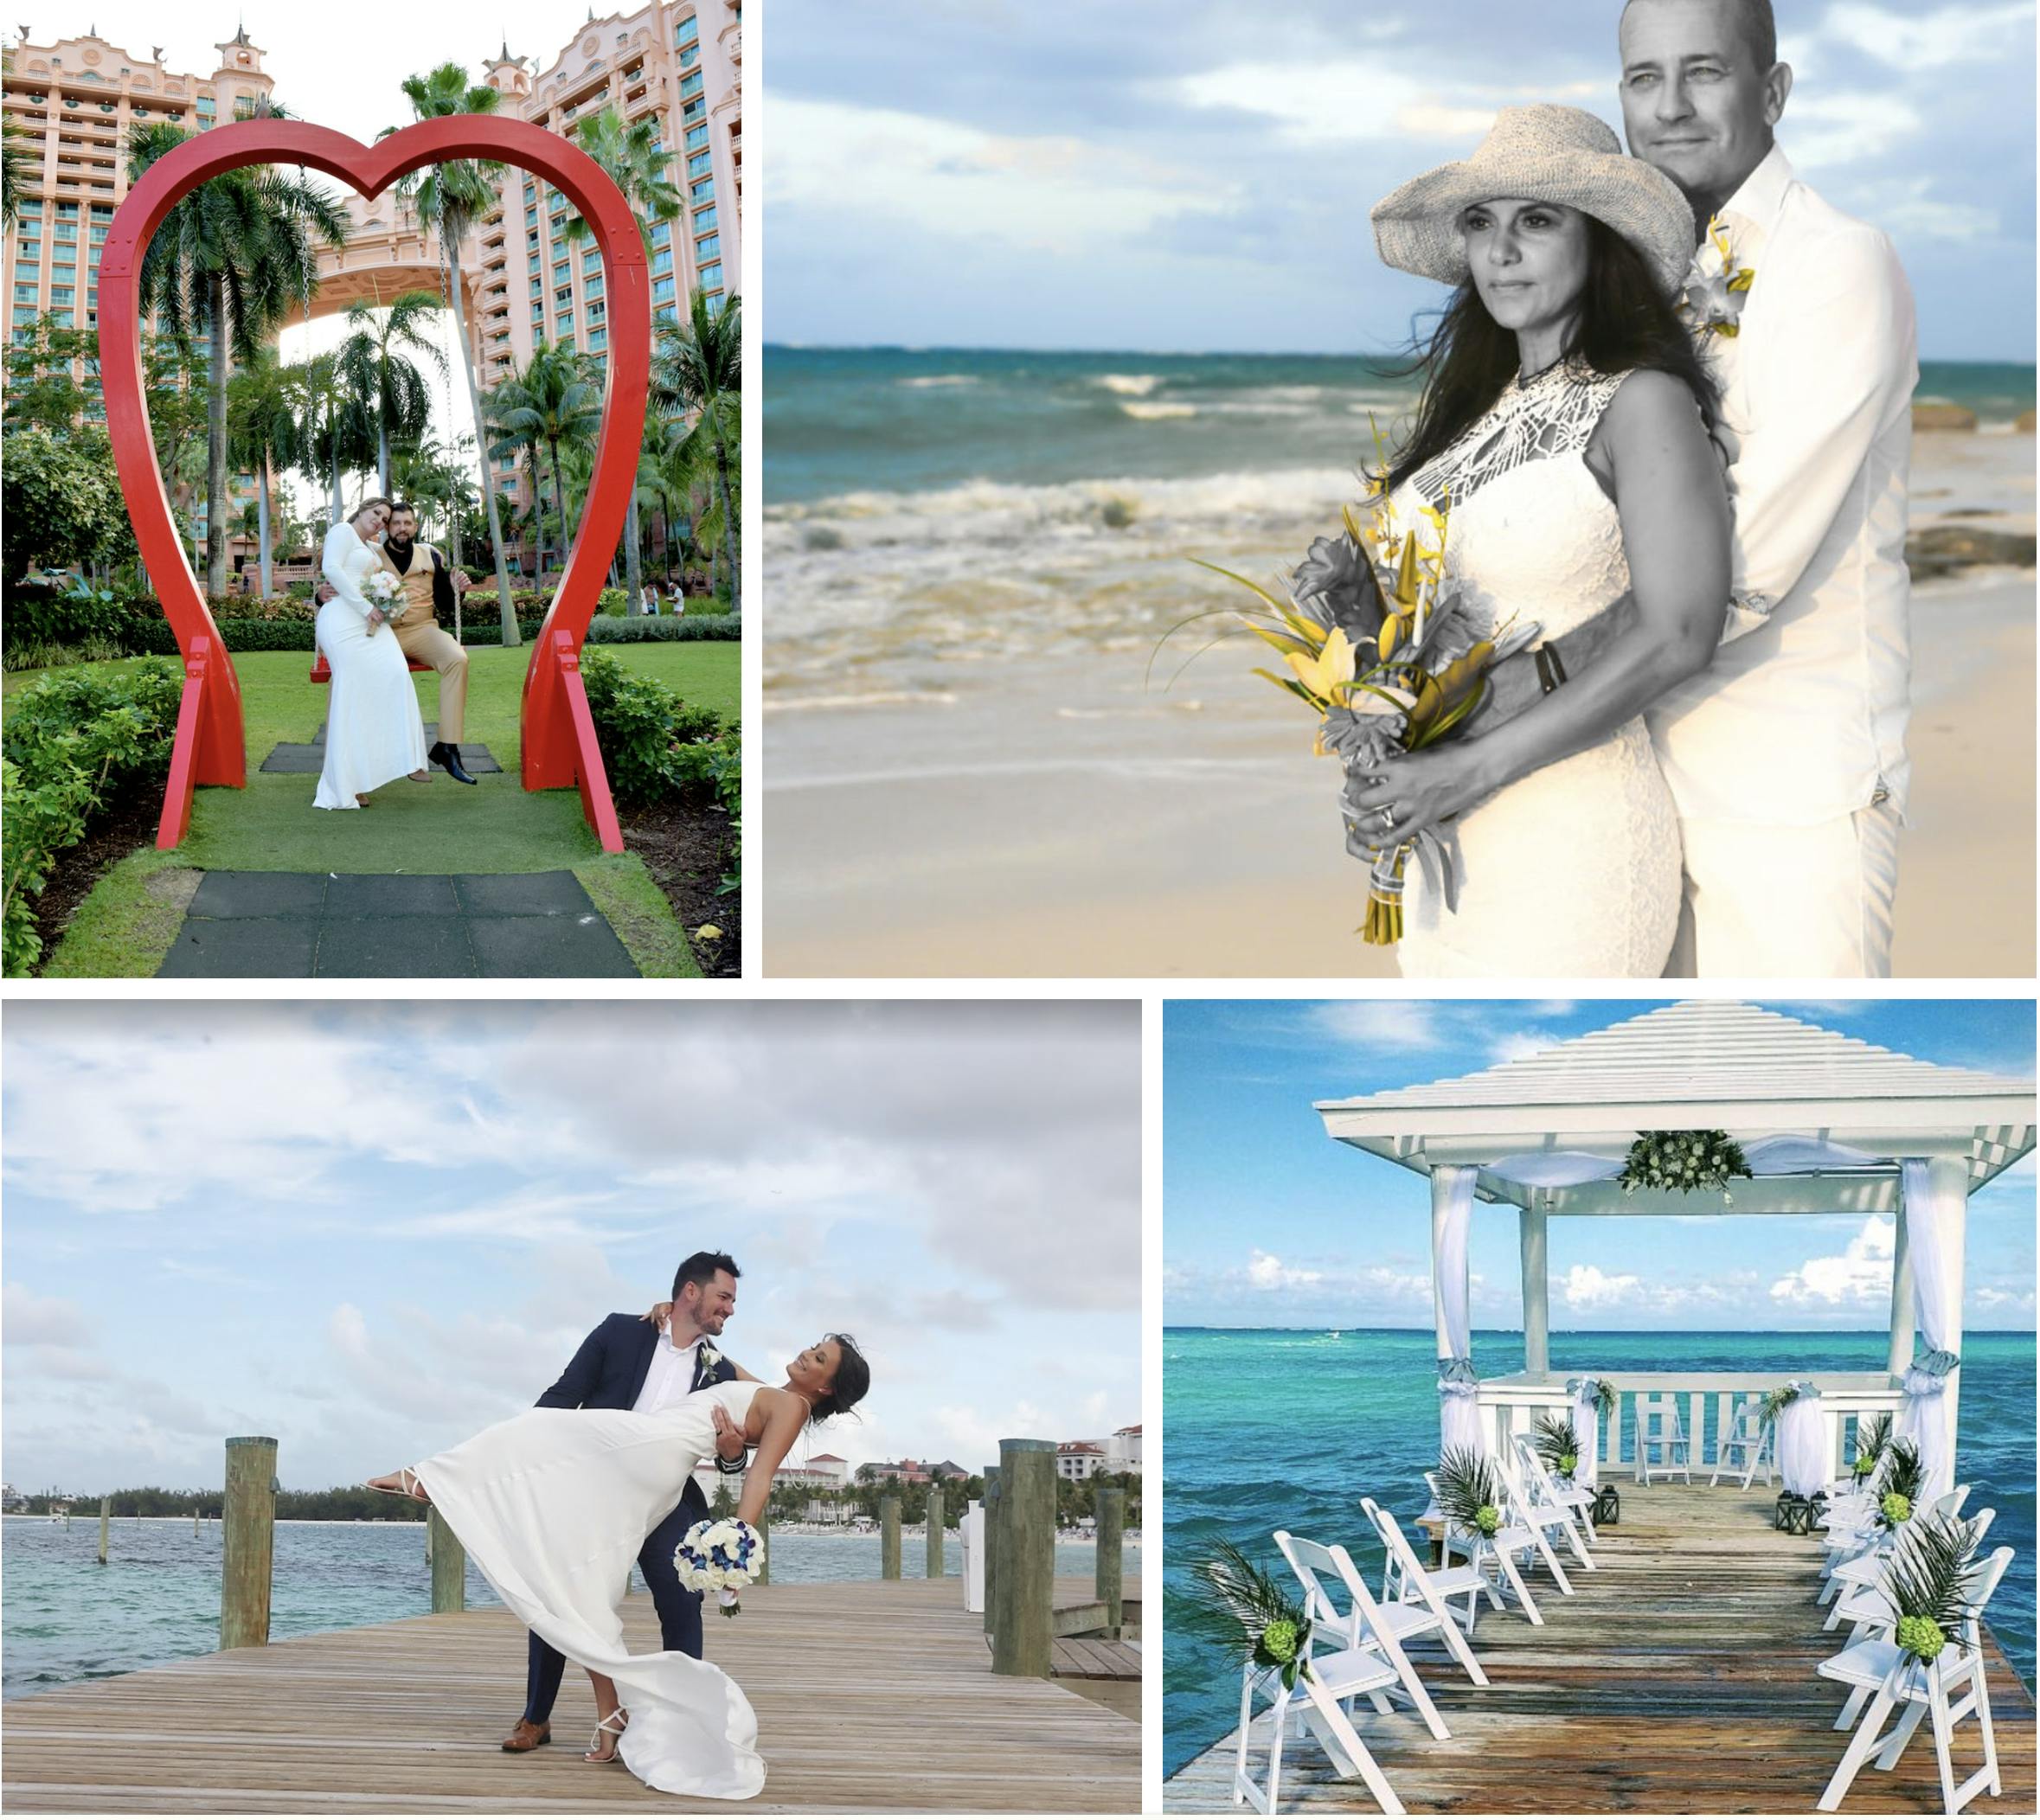 How to Get Married in Nassau Bahamas